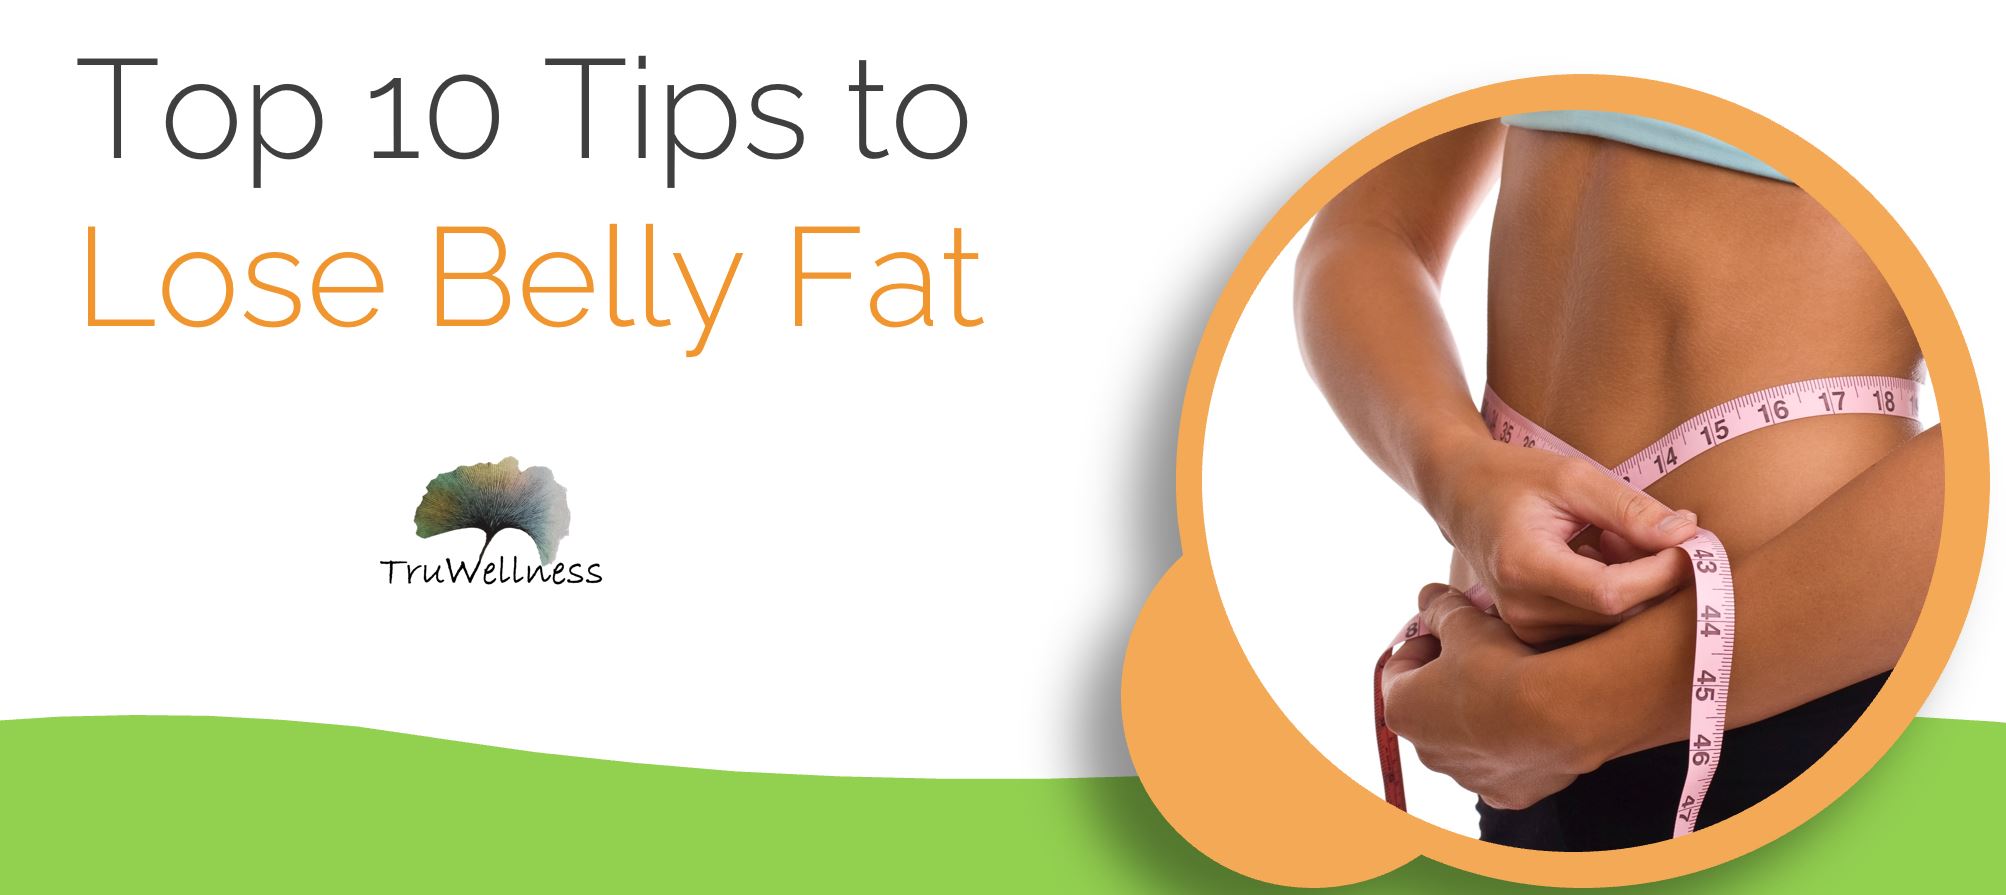 Top 10 Tips to Lose Belly Fat